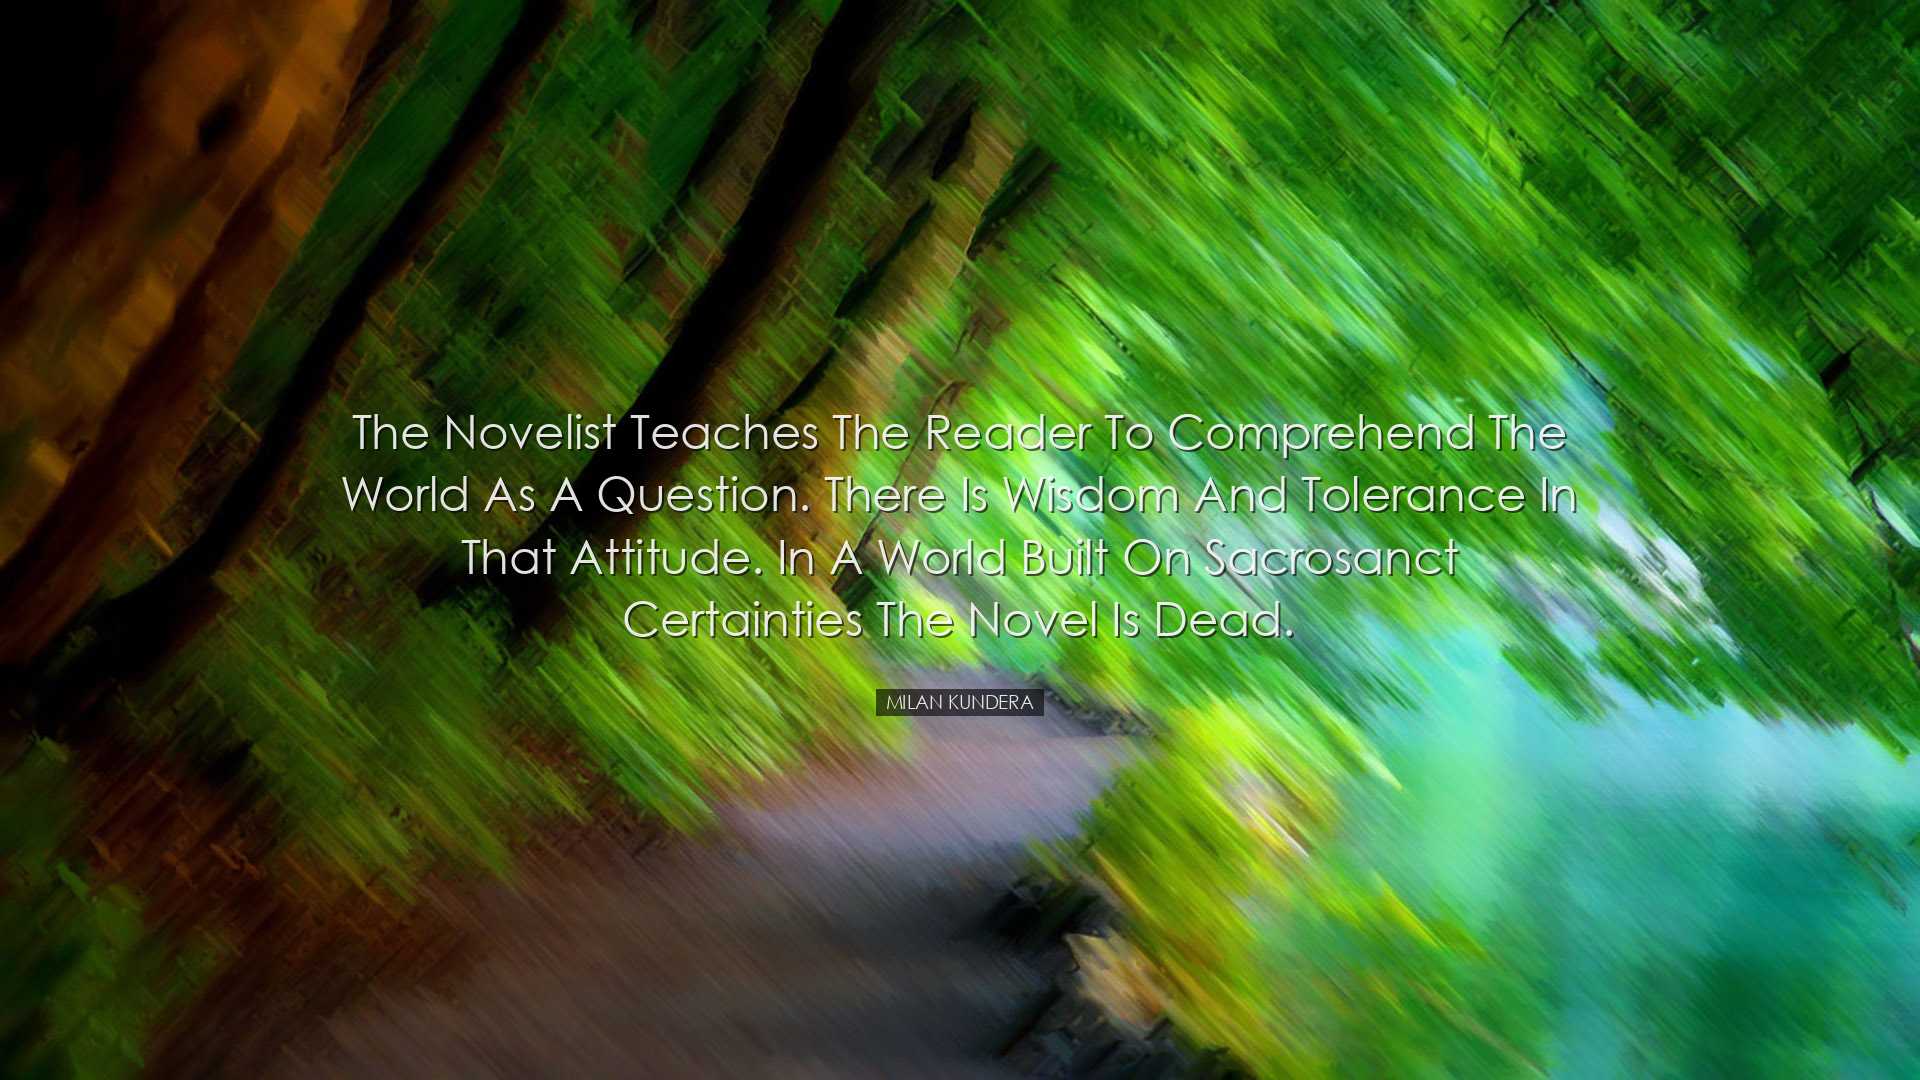 The novelist teaches the reader to comprehend the world as a quest